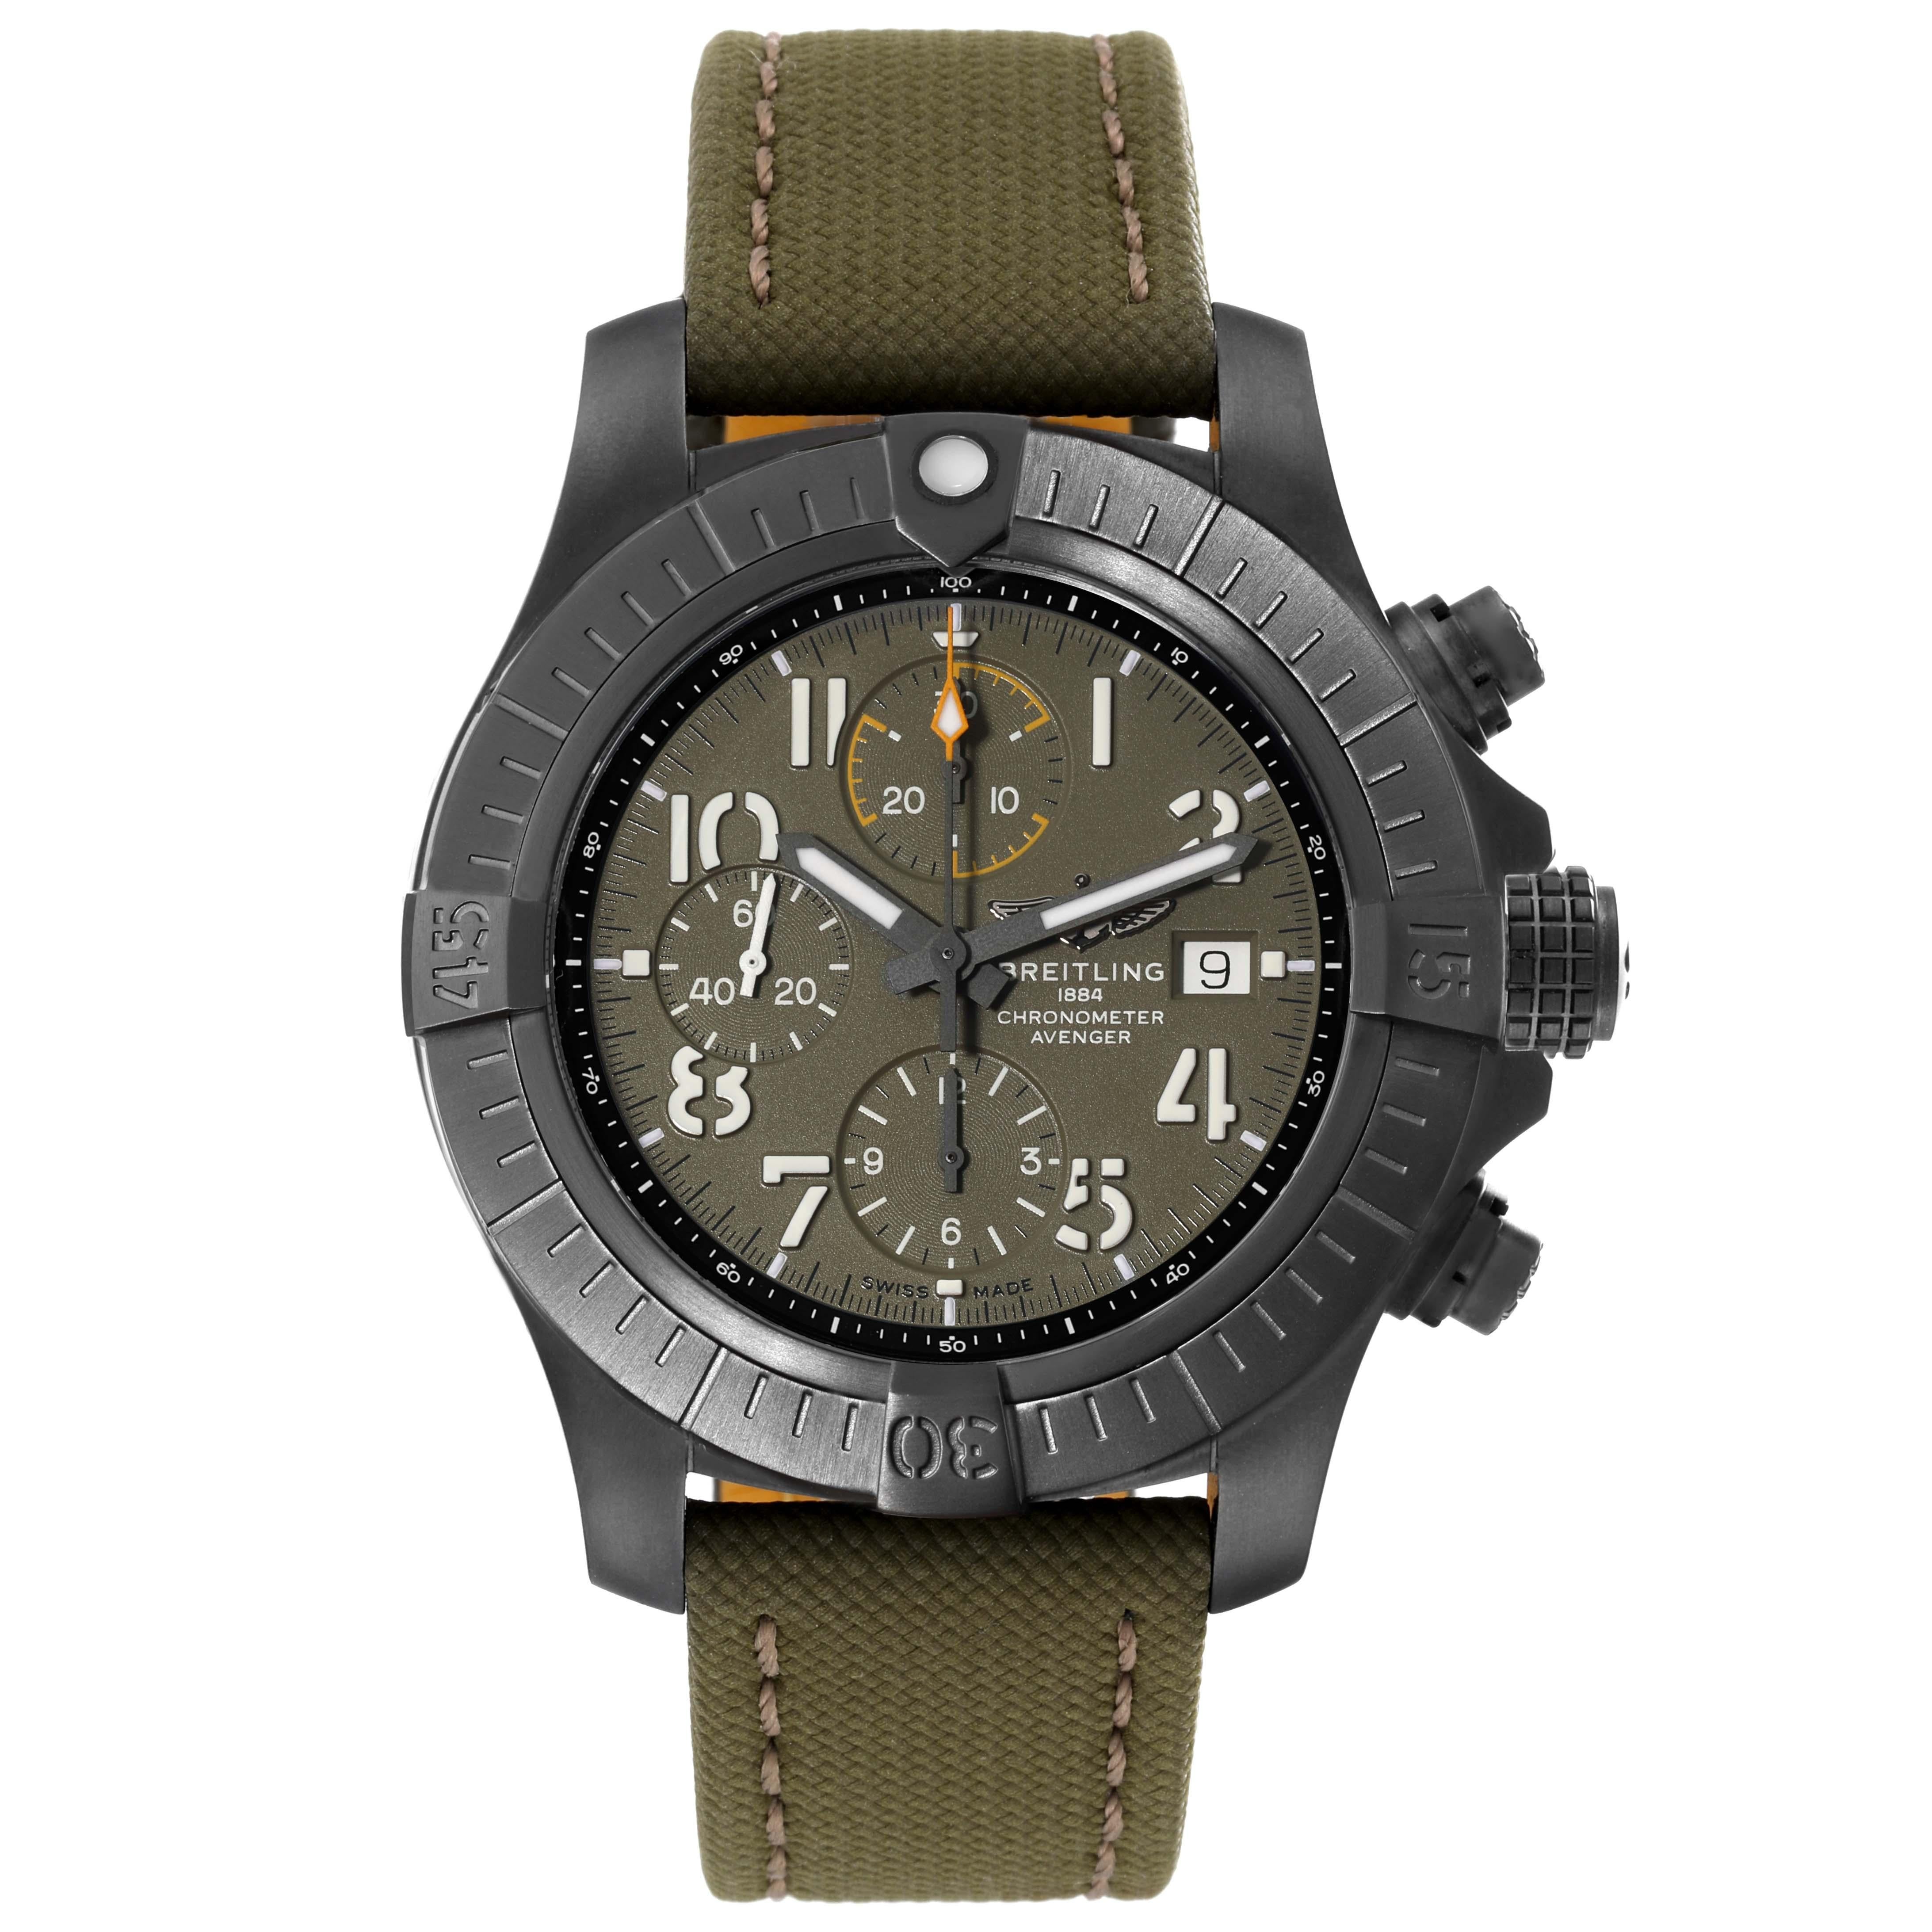 Breitling Avenger Night Mission DLC Coated Titanium Mens Watch V13317 Box Card. Automatic self-winding chronograph movement. DLC-Coated Titanium case 45 mm in diameter with screwed-locked crown and pushers. DLC-Coated Titanium unidirectional